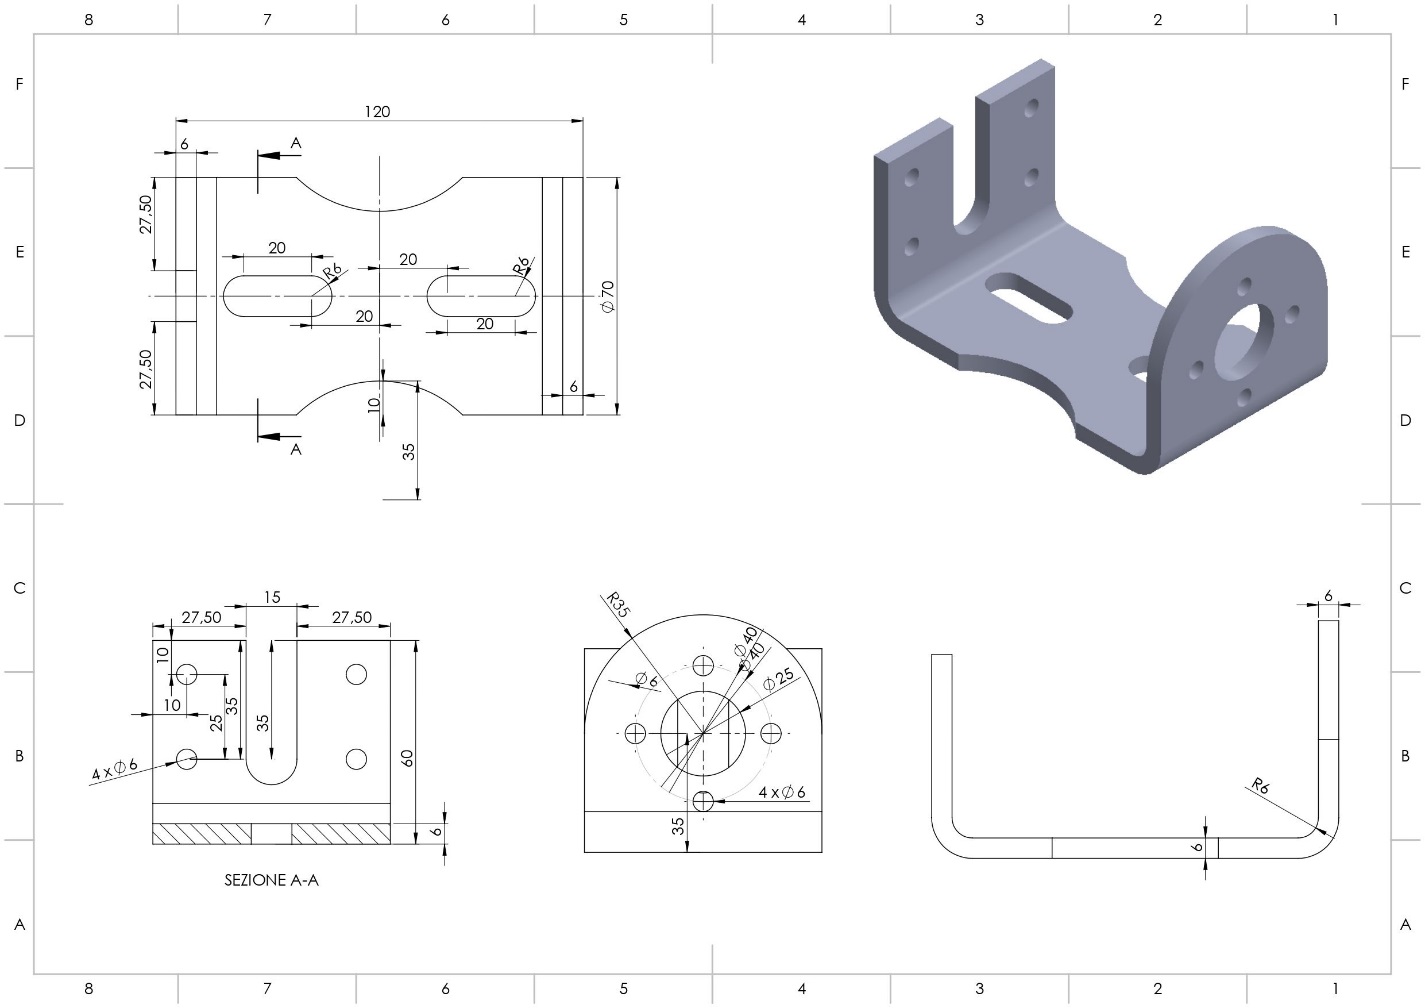 Solved: Doesn't chamfered cone shape unbend support yet? - PTC Community